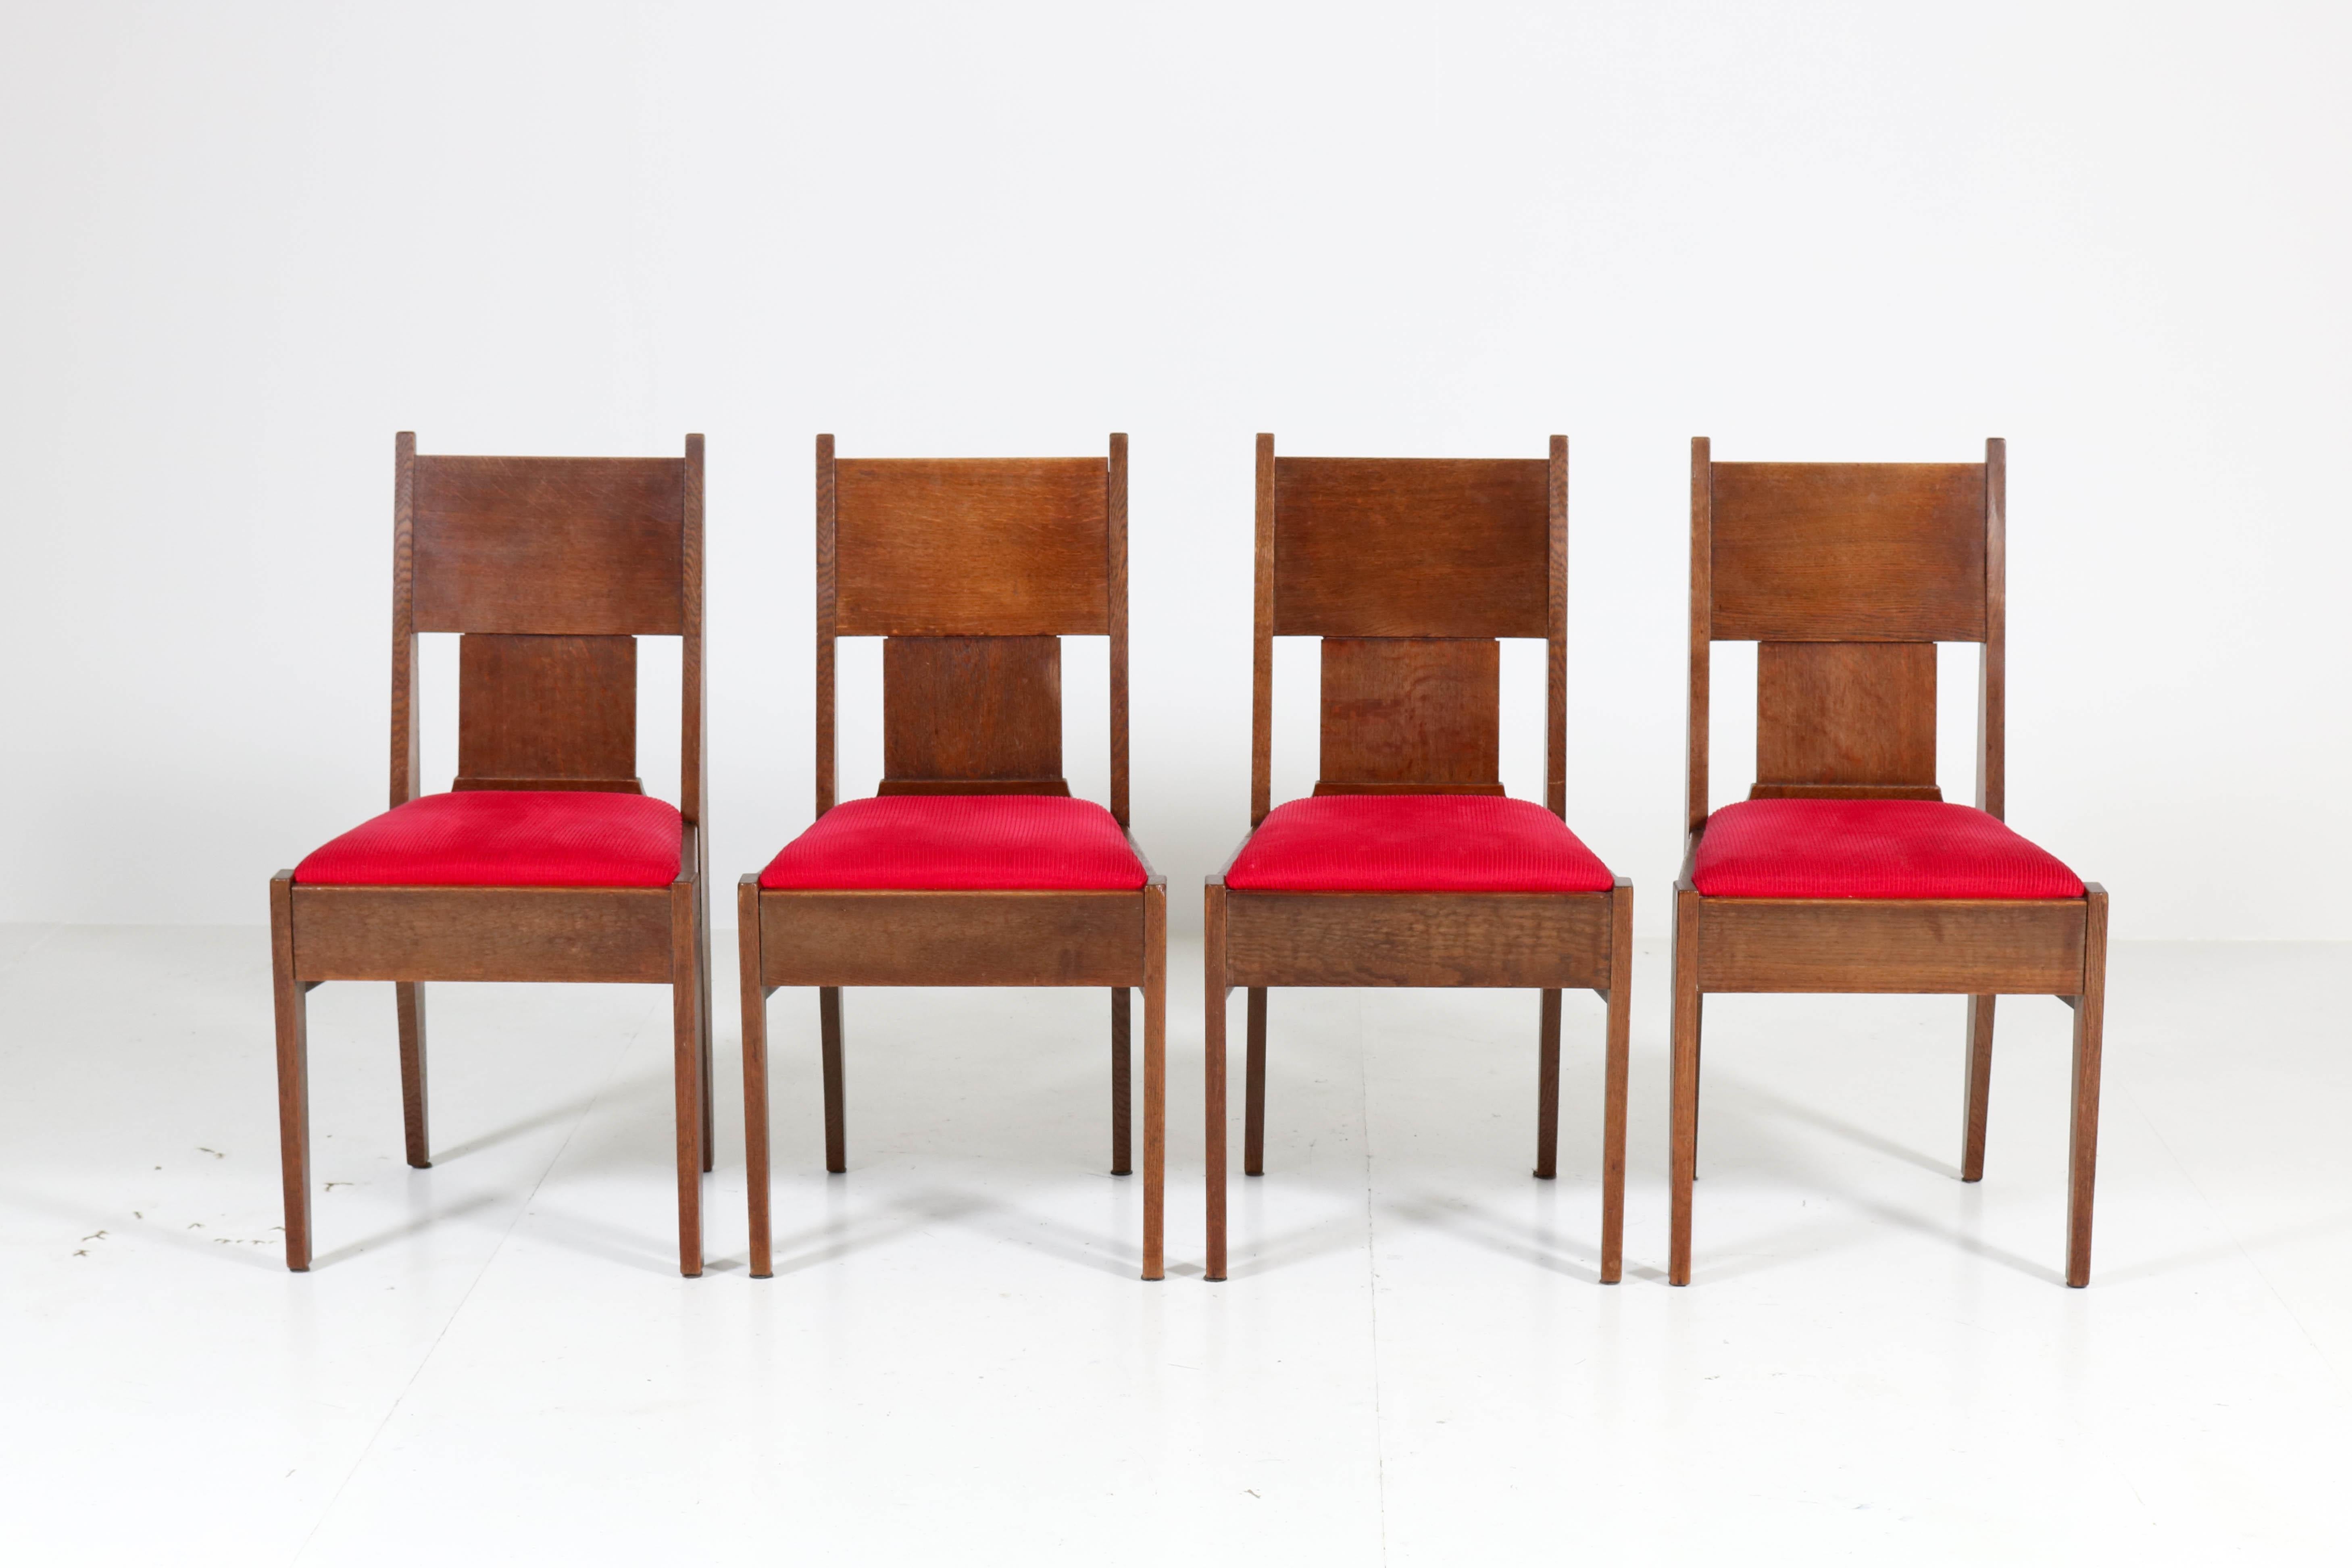 Wonderful set of two Art Deco Haagse School armchairs and four side chairs.
Design by H. Fels for L.O.V. Oosterbeek.
Striking Dutch design from the twenties.
Solid oak and the seats are re-upholstered with red Manchester corduroy fabric.
All